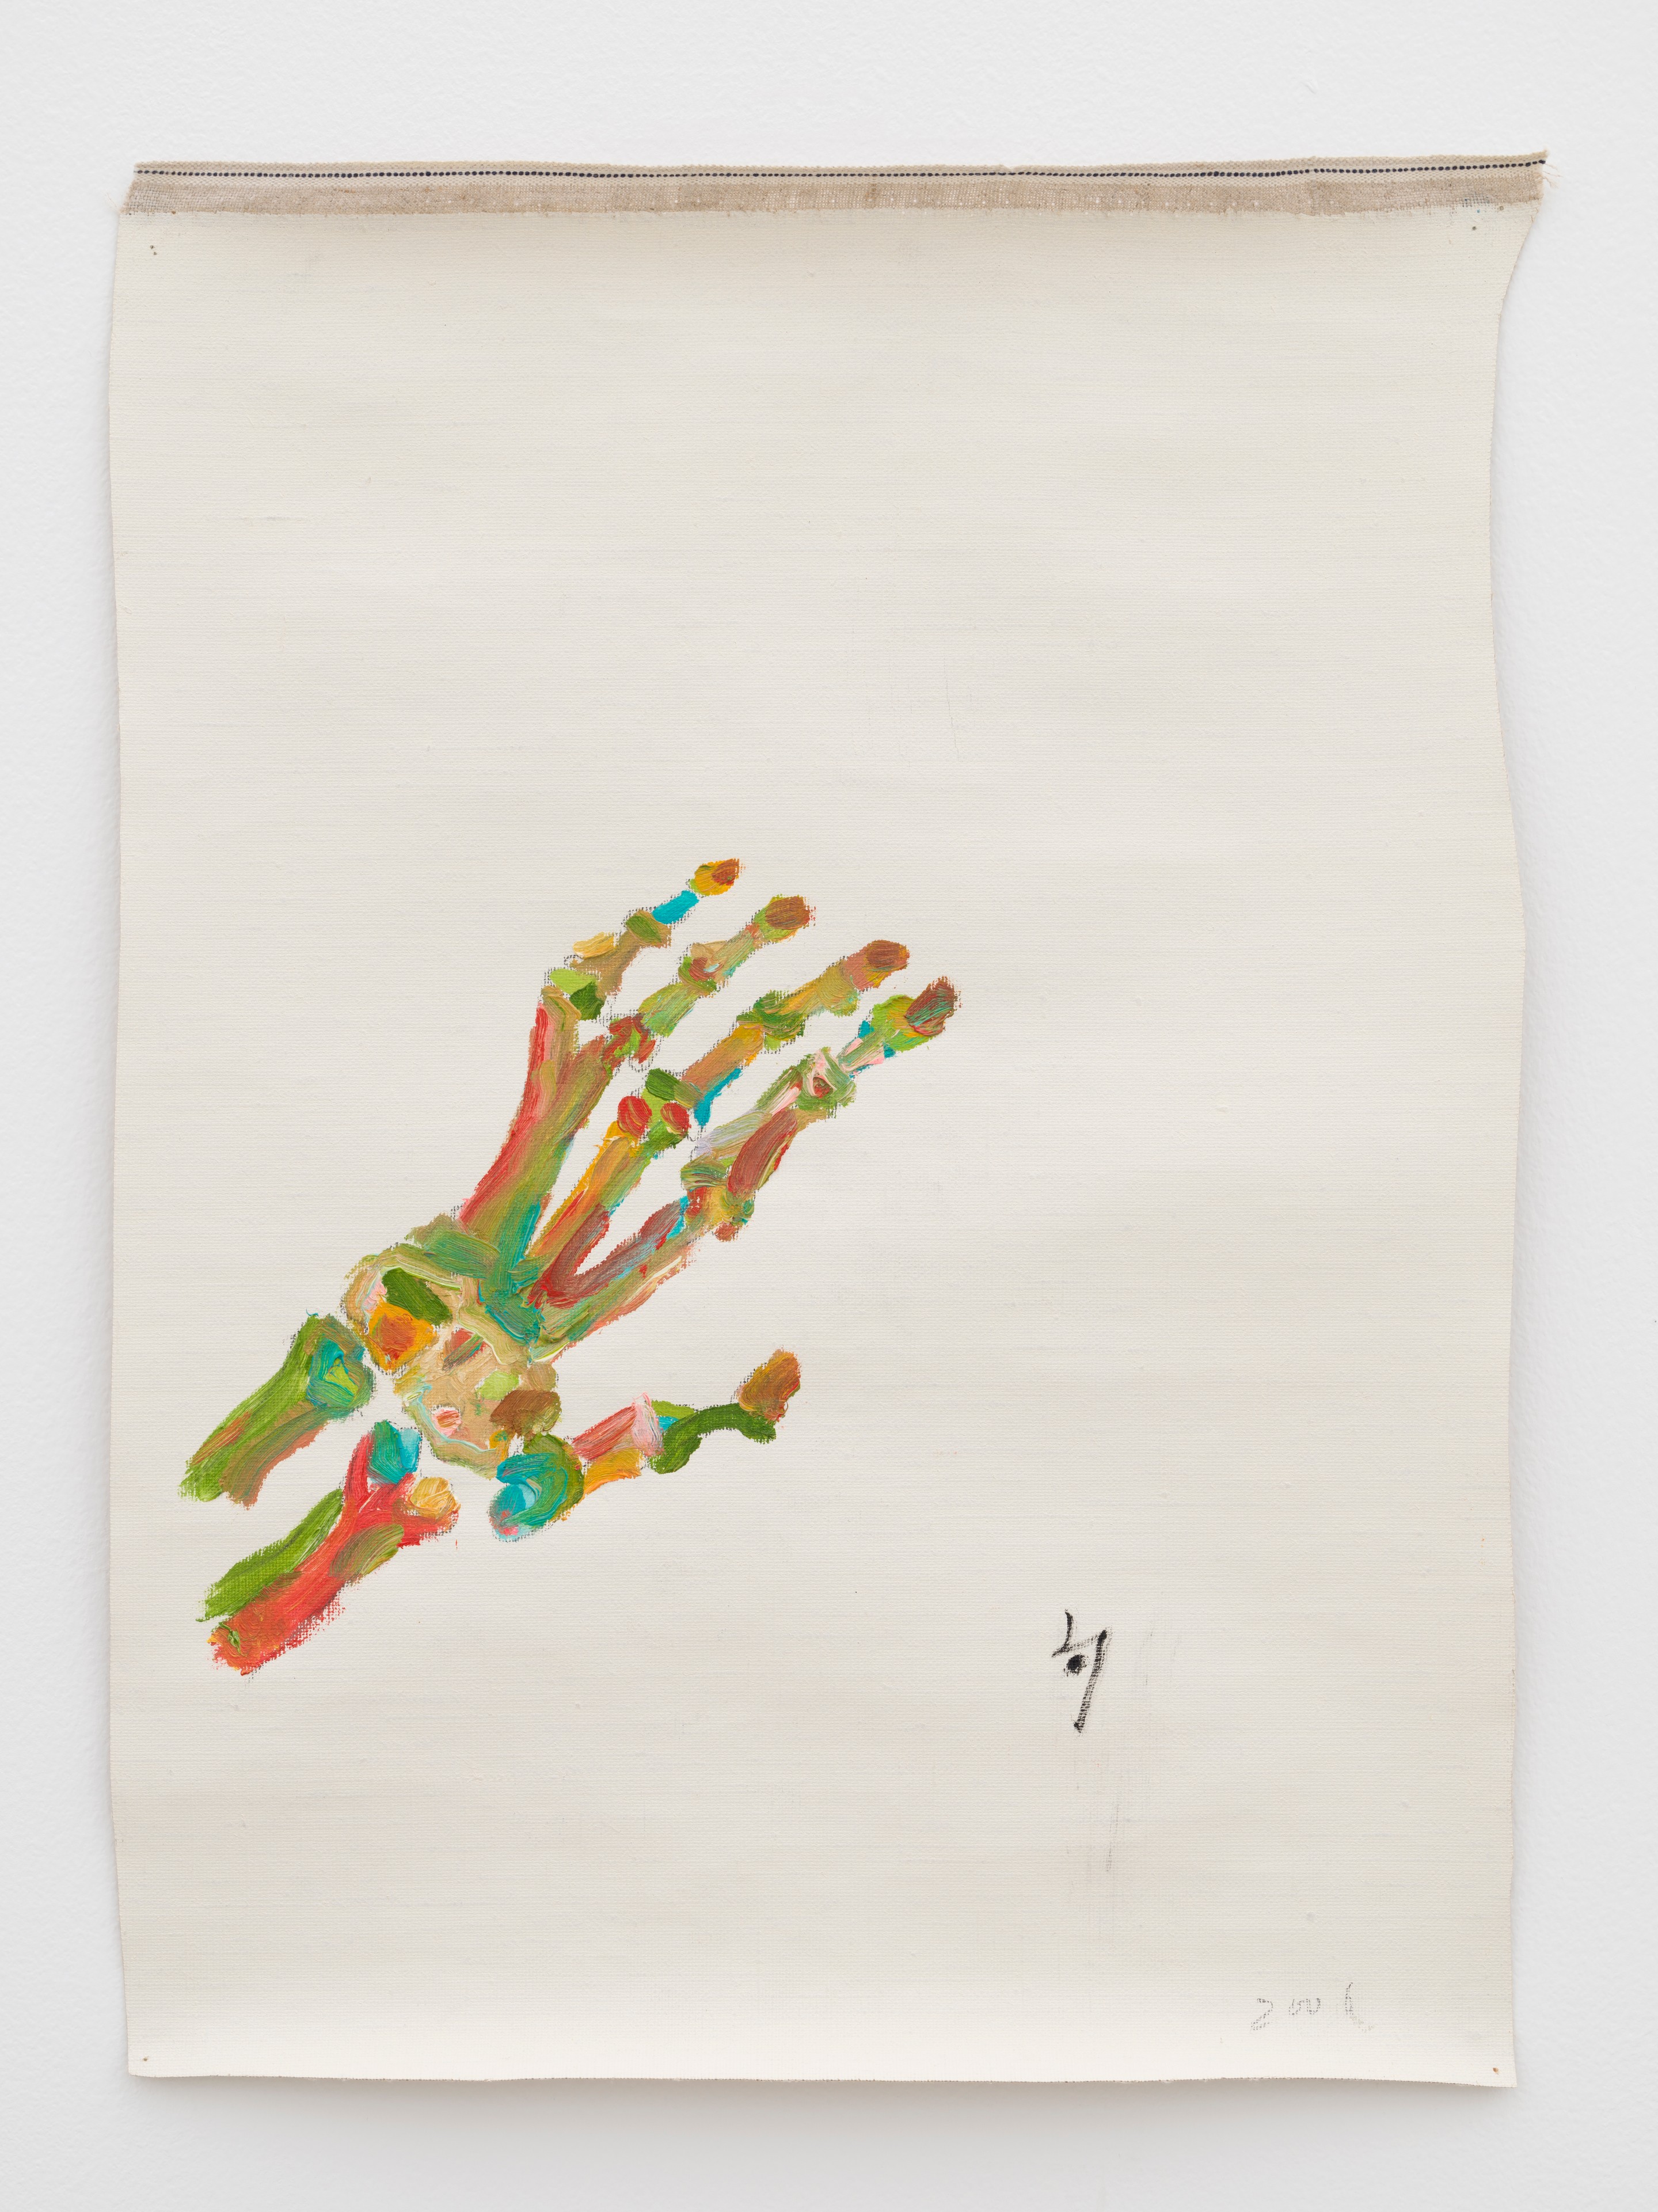 Hand (2006-2018)
Oil on canvas. 17.5h x 13w in (44.5h x 33w cm).